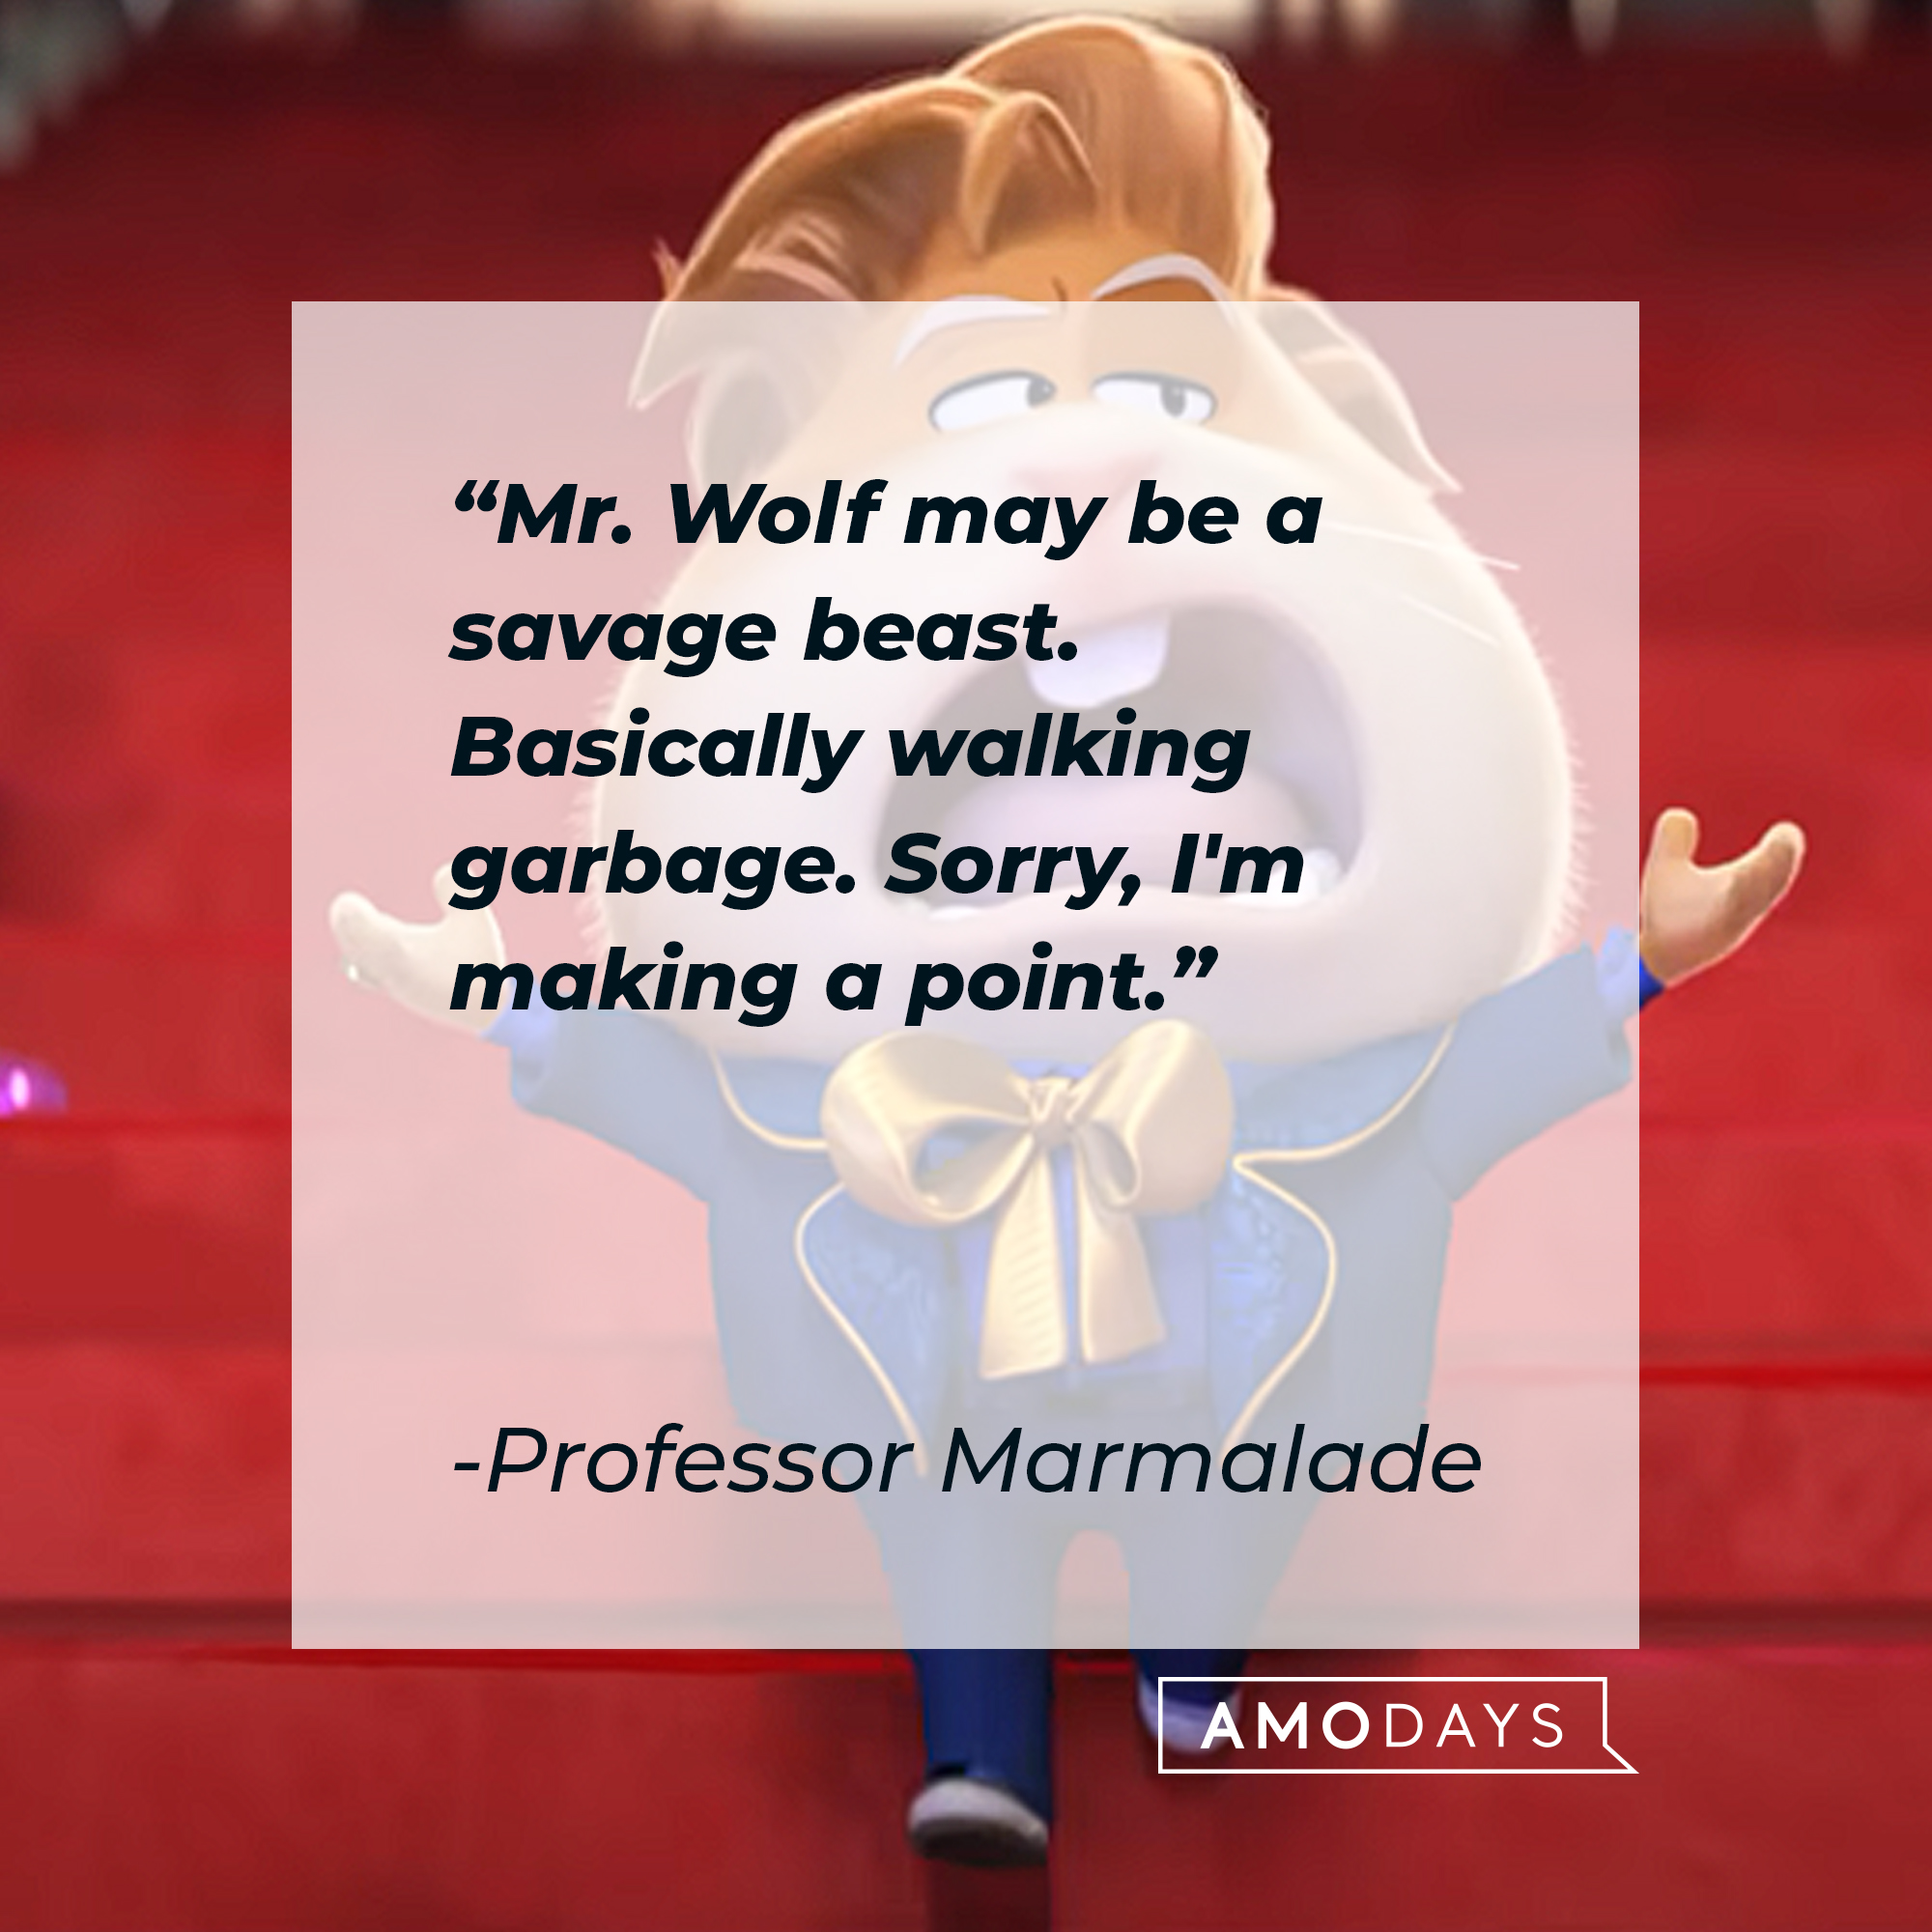 Professor Marmalade's quote: "Mr. Wolf may be a savage beast. Basically walking garbage. Sorry, I'm making a point." | Source: youtube.com/UniversalPictures